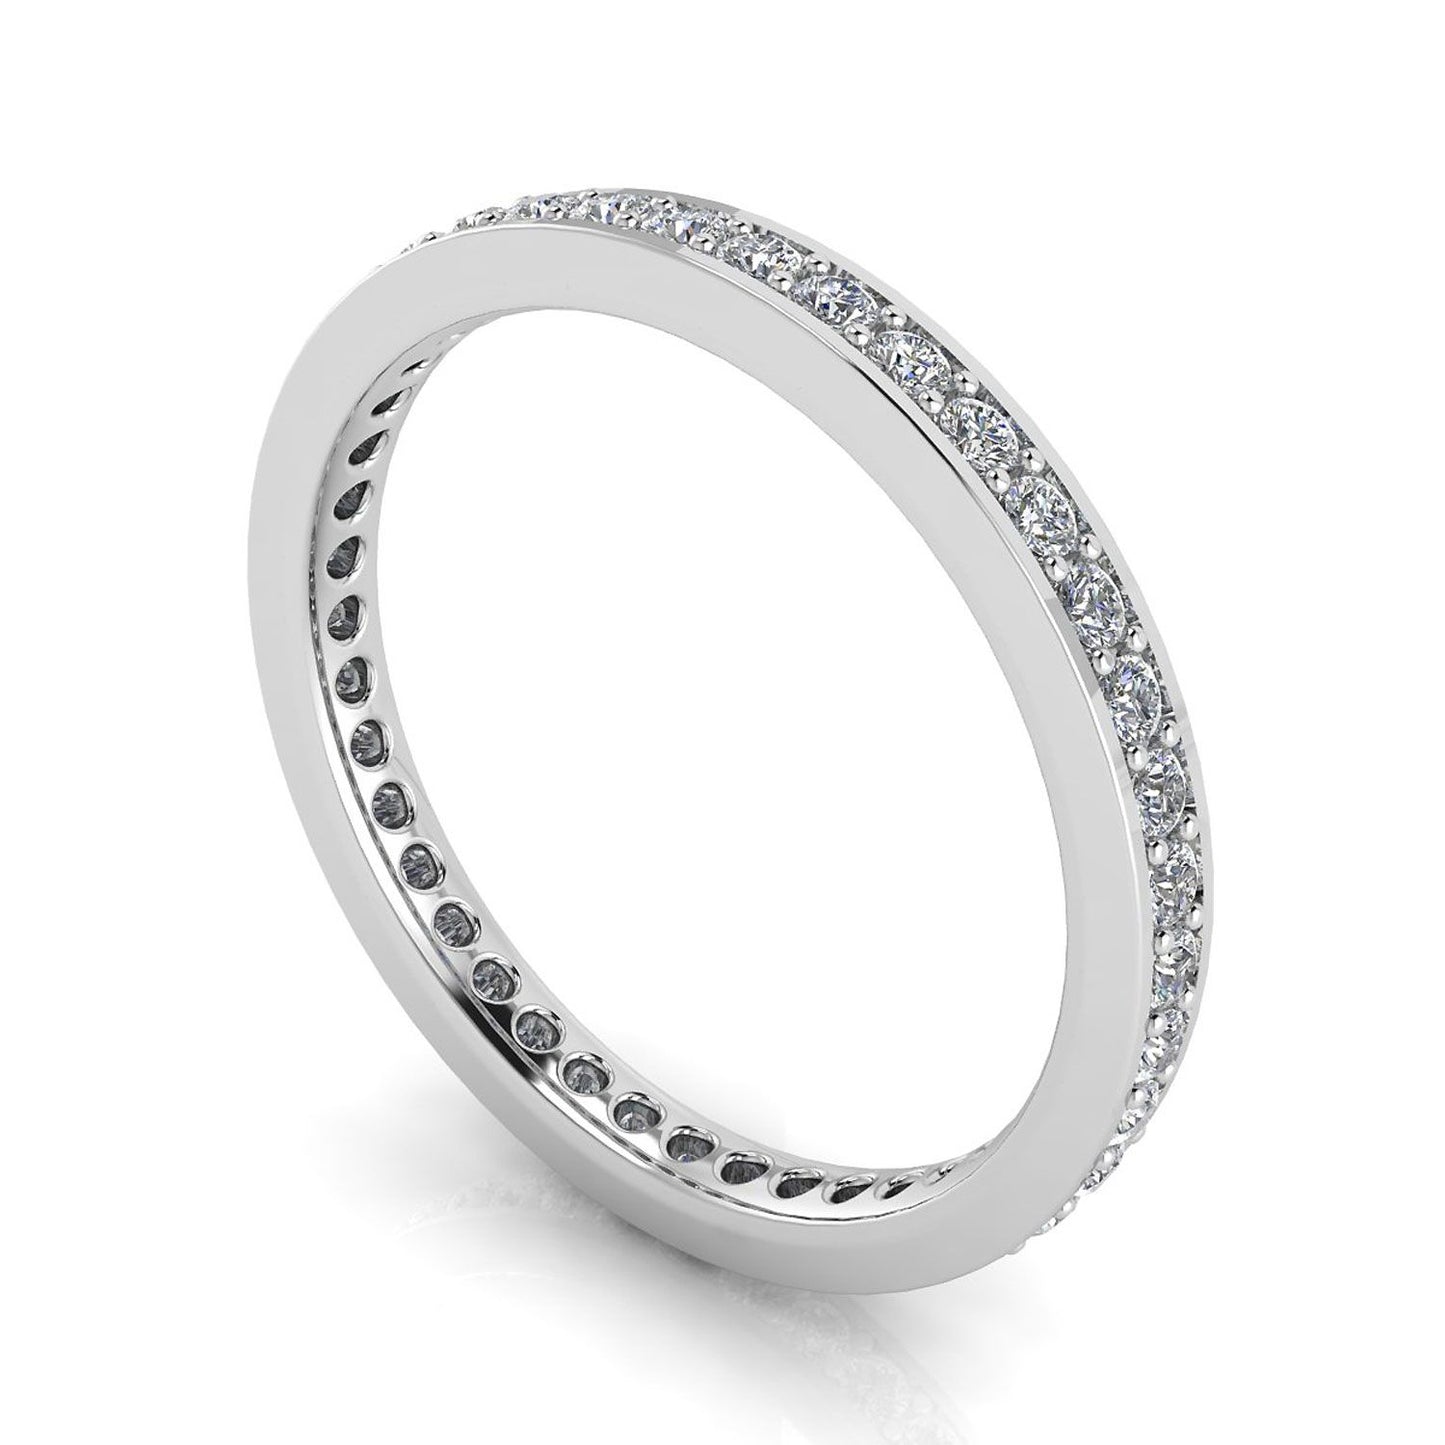 Round Brilliant Cut Diamond Channel Pave Set Eternity Ring In 18k White Gold  (0.5ct. Tw.) Ring Size 8